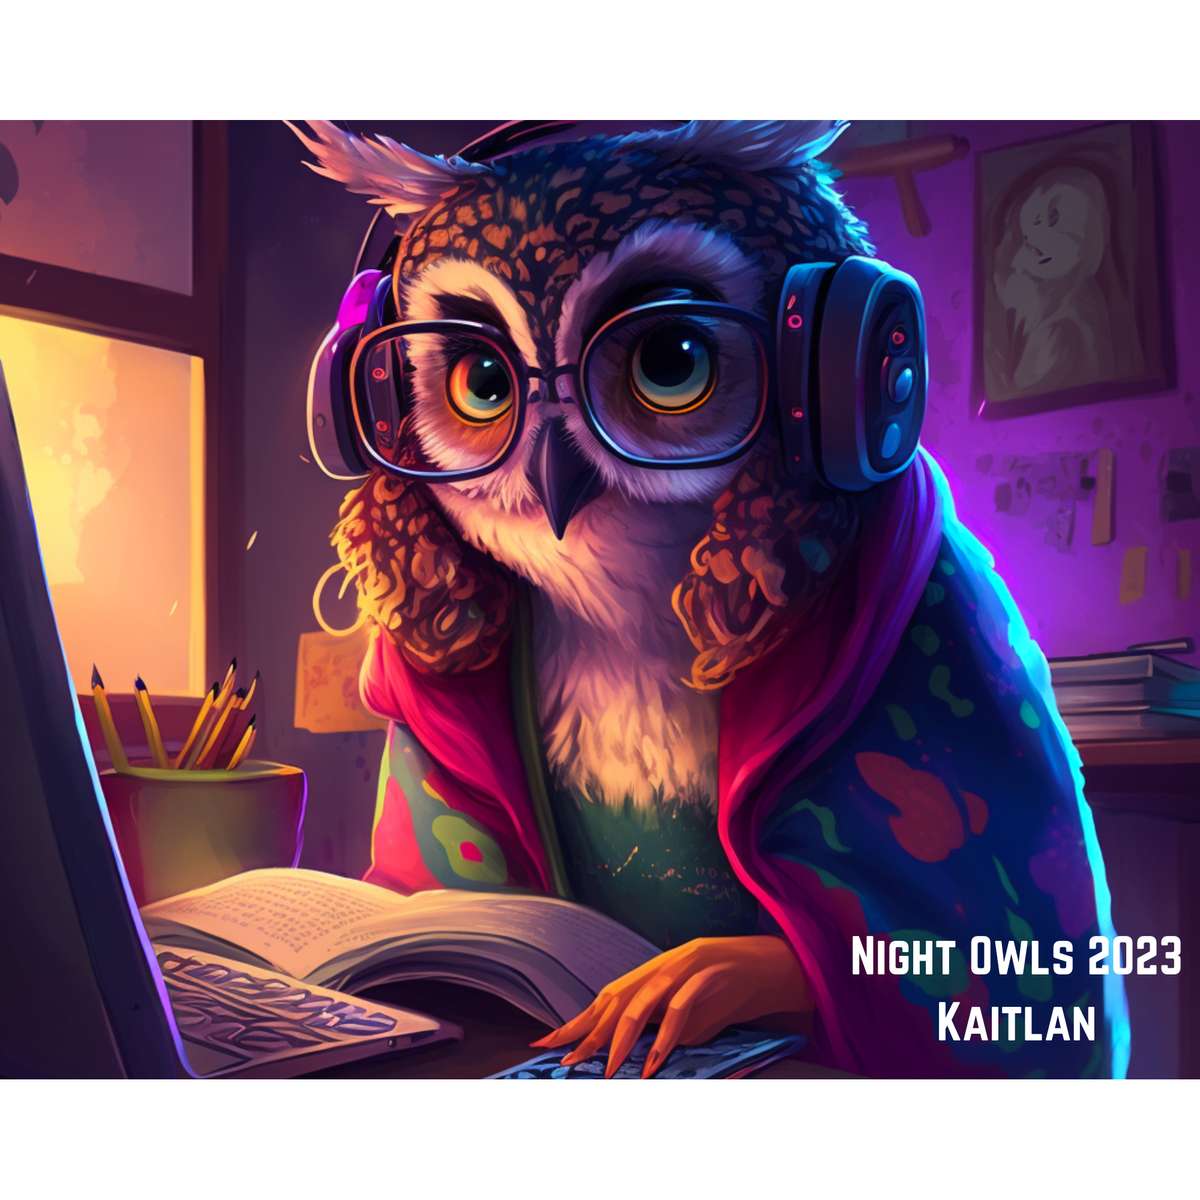 Kaitlan Night Owls 2023 puzzle online from photo